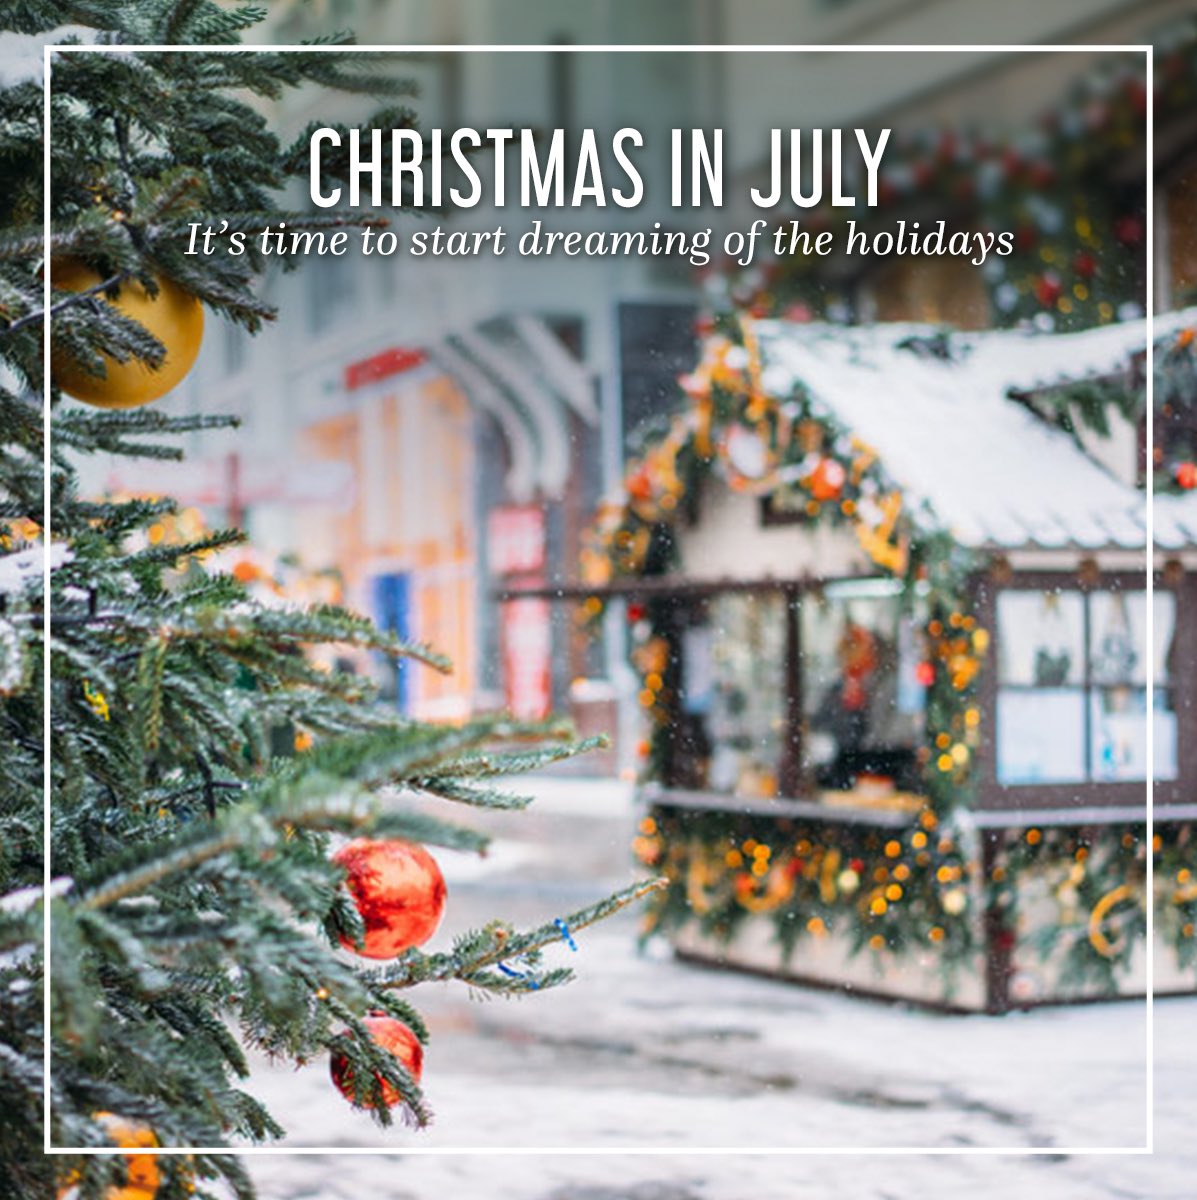 Twinkling lights, jolly music, warm scent of gingerbread—it may seem early, but NOW is exactly the time to start planning for Fall/Winter vacays👇

LetsGlobetrot.com

#ChristmasInJuly #christmasmarkets #fall #winters #wintervacations #travel #letsglobetrot #vacationmode